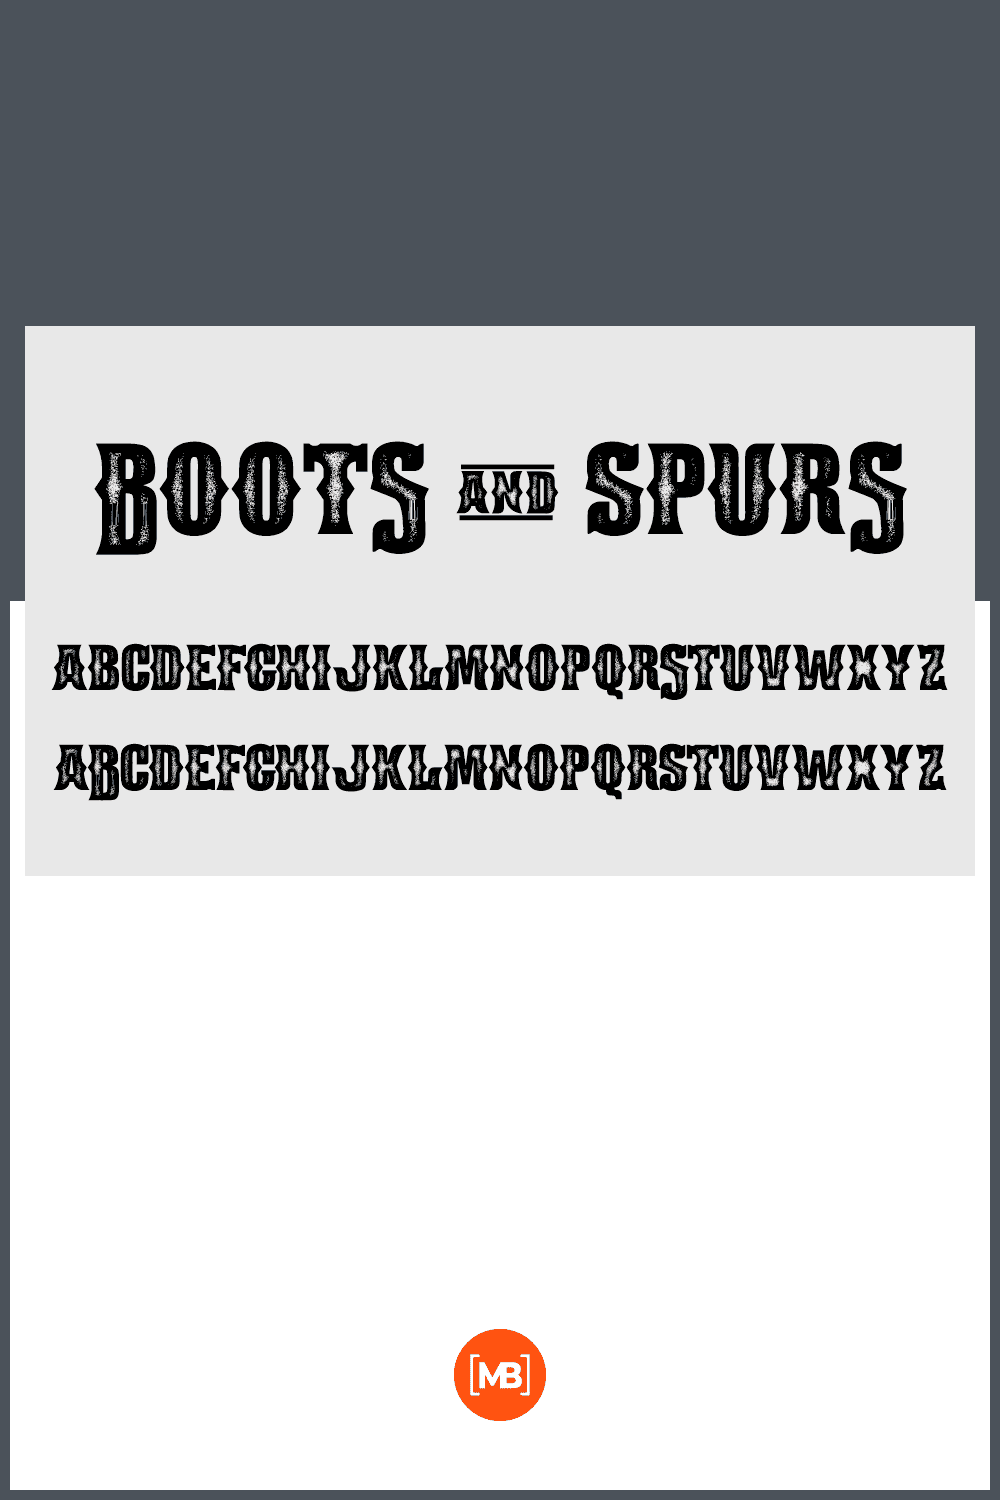 Vintage font with different words size.